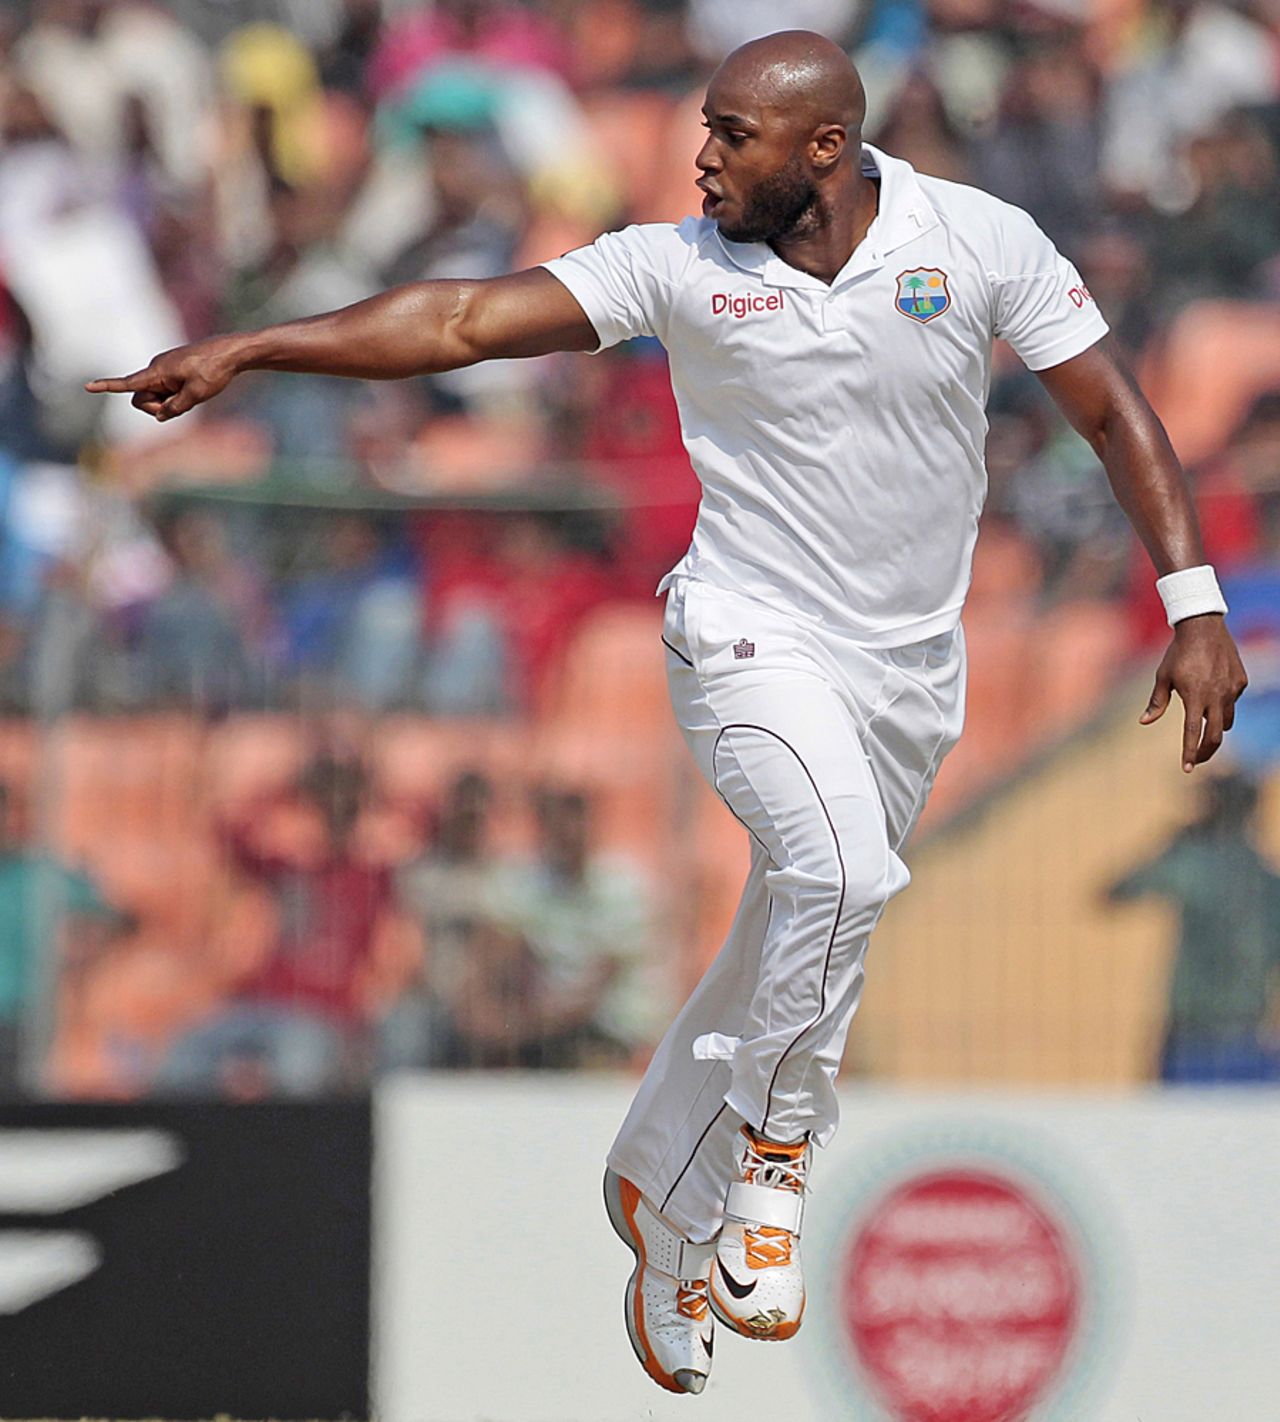 Tino Best gestures after getting Naeem Islam bowled, Bangladesh v West Indies, 2nd Test, Khulna, 4th day, November 24, 2012